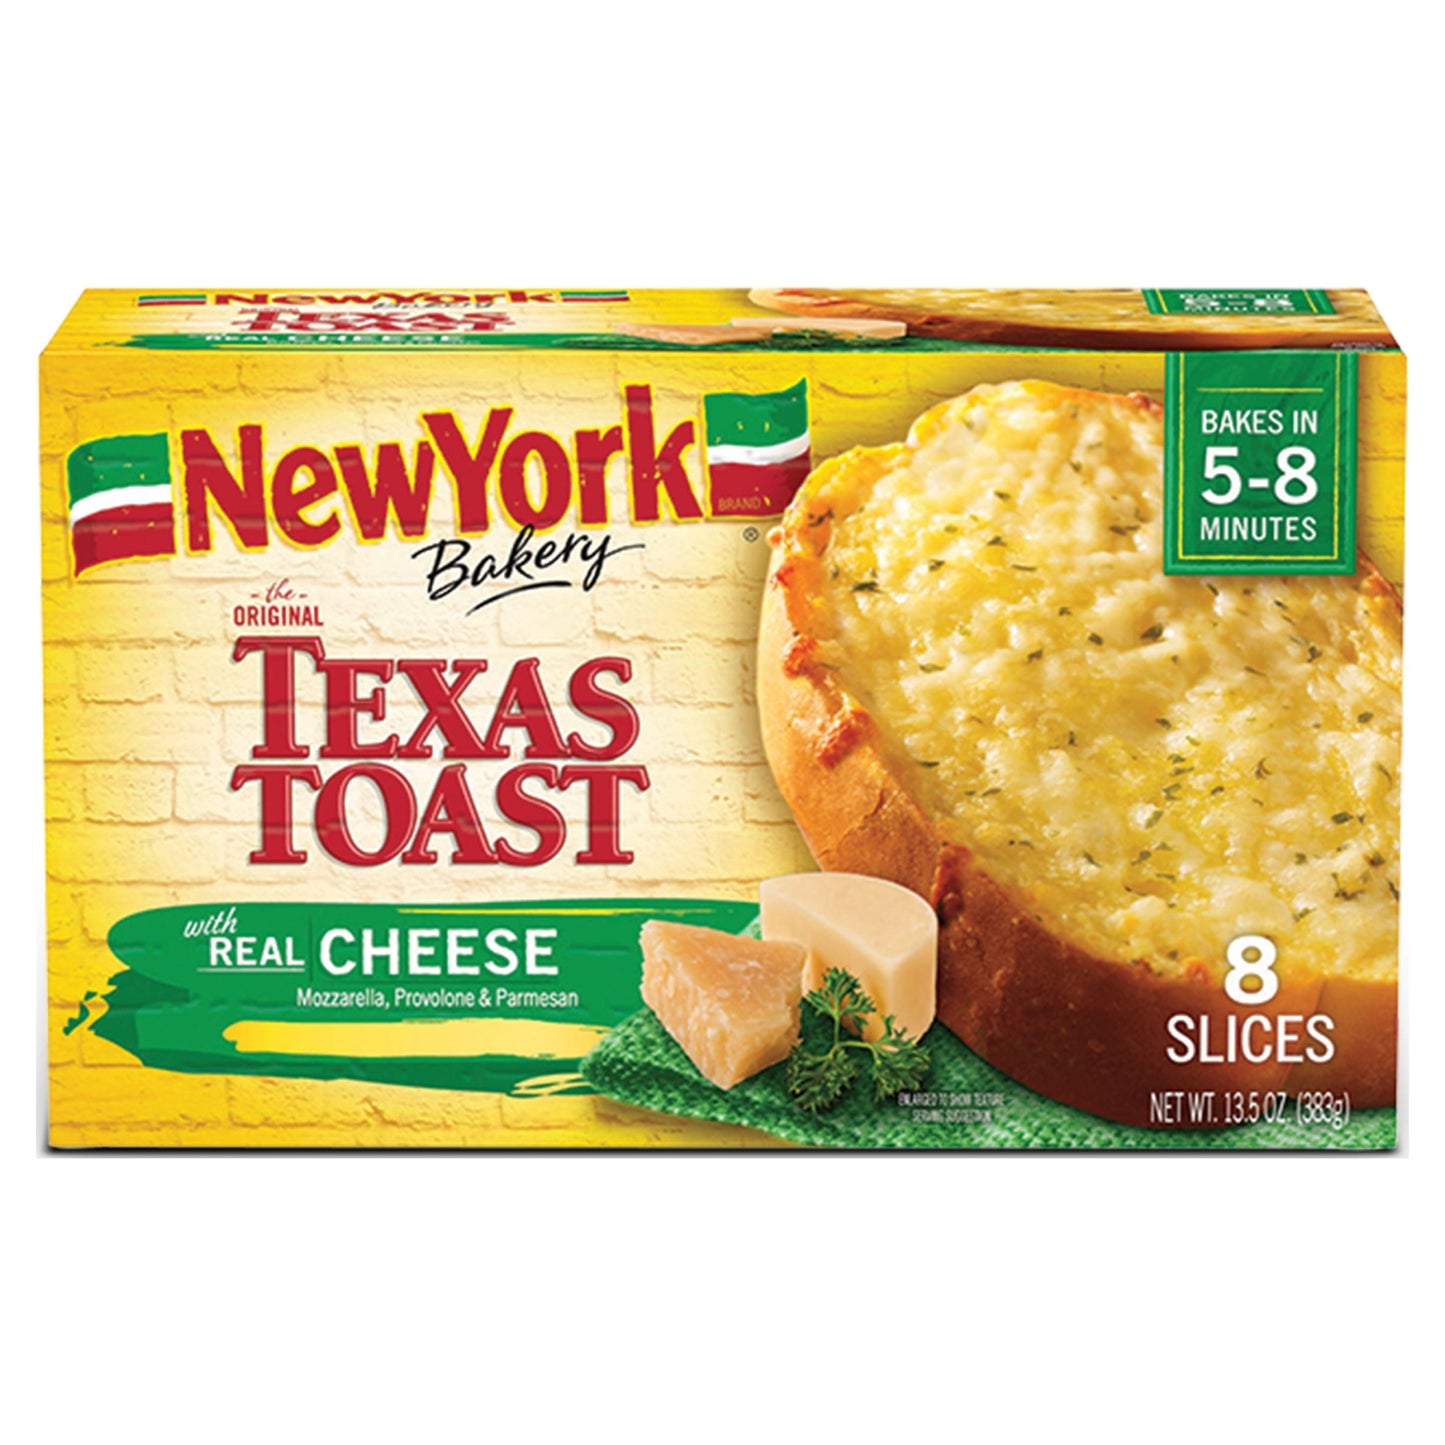 New York Bakery The Original Texas Toast with Real Cheese, 13.5 oz Box